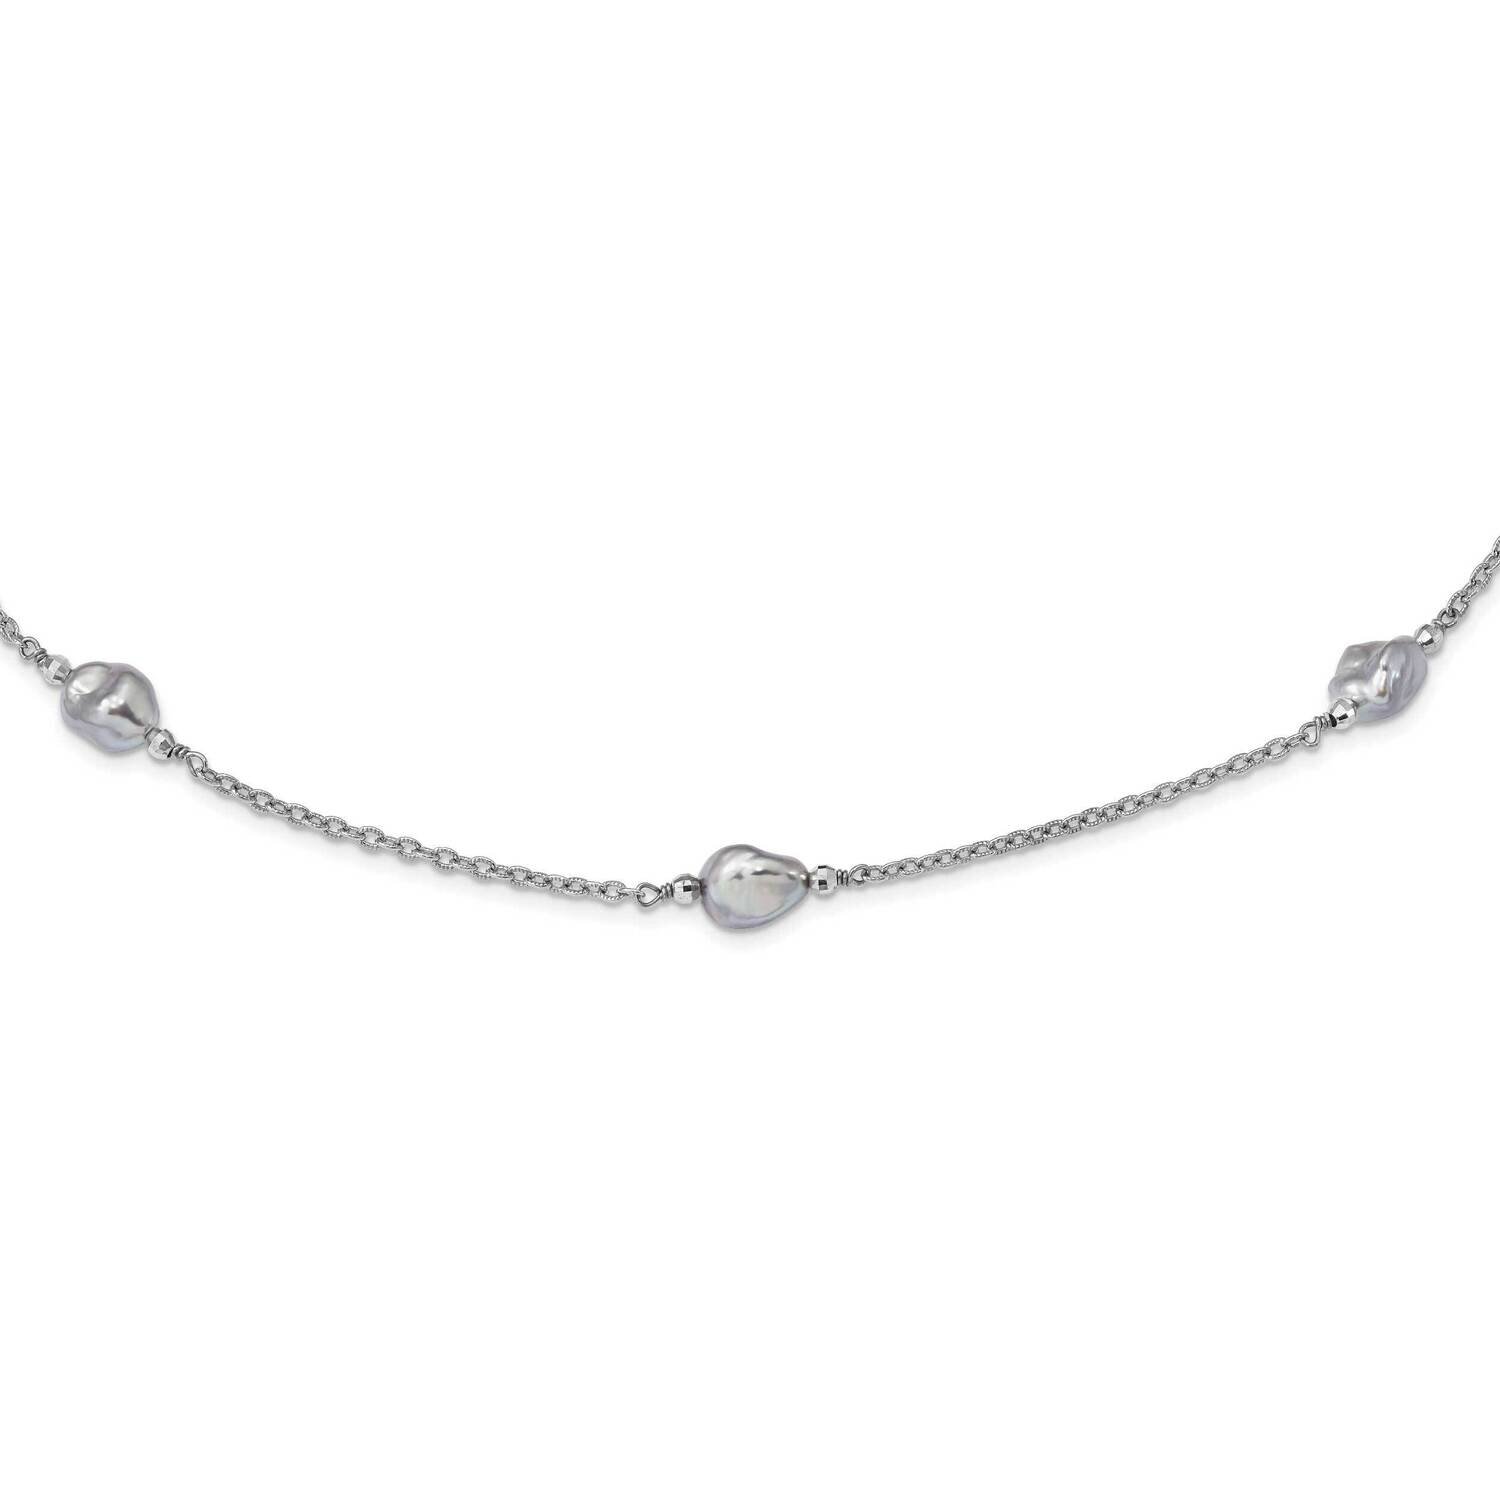 8-9mm Grey Baroque Fwc Pearl 9 Station Necklace Sterling Silver Rhodium-Plated QH5343-30